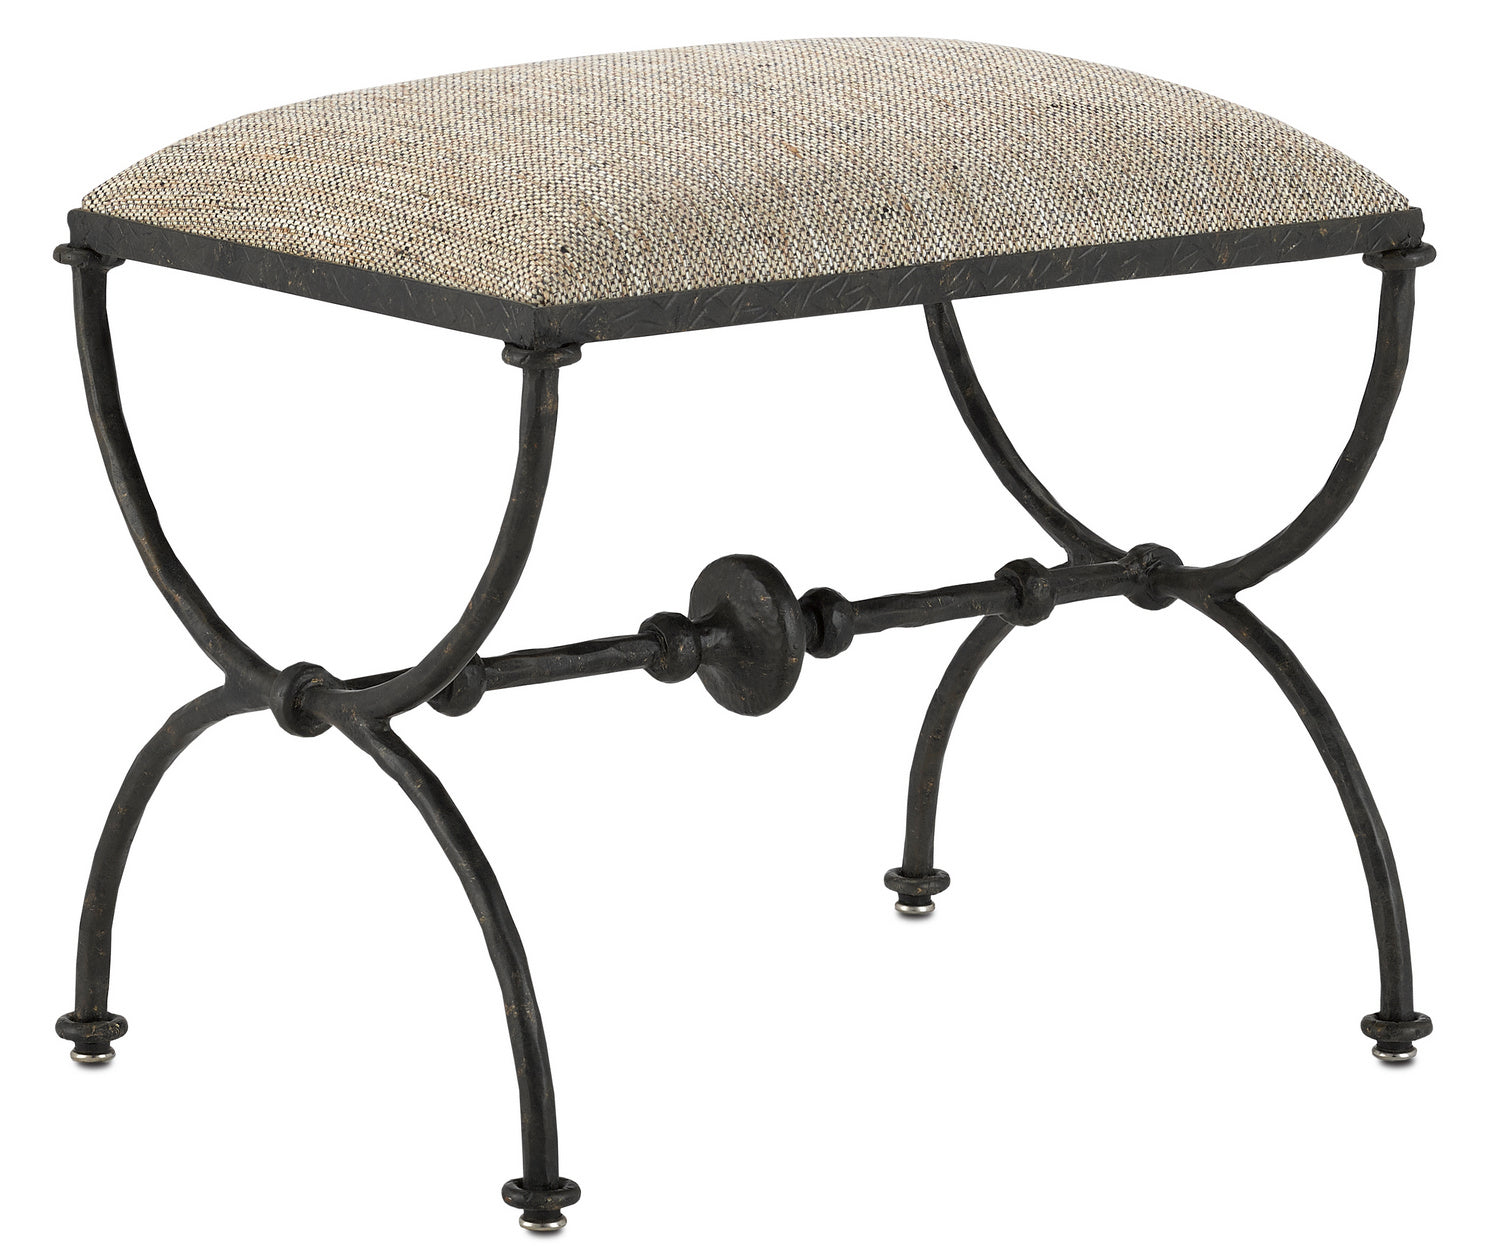 Ottoman from the Agora collection in Rustic Bronze finish